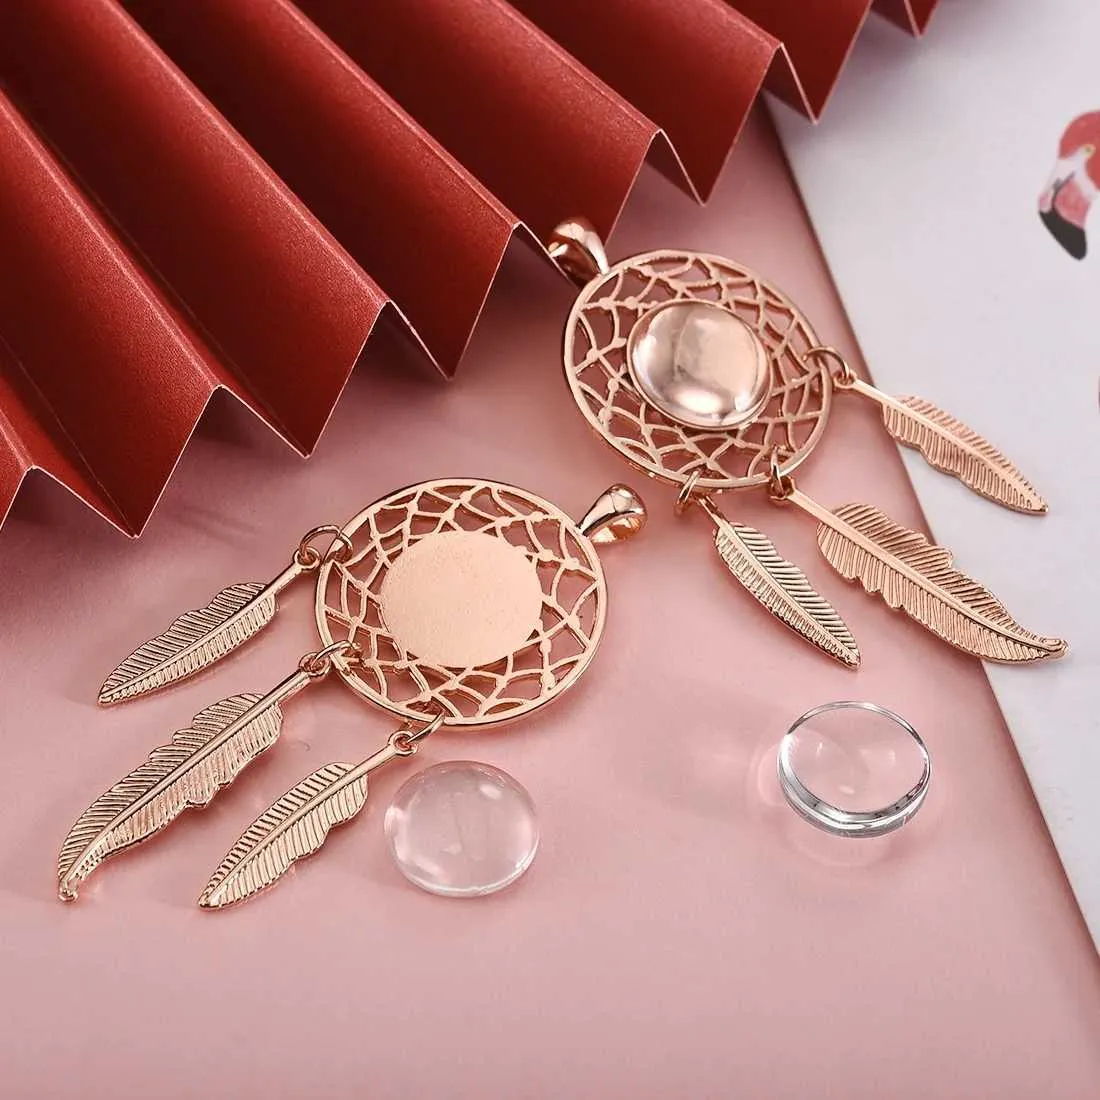 Jewelry Tray 4pcs Dream Catcher Round Cabochon Base Settings Blank Tray Pendant Jewelry Making DIY Findings Alloy Base Wholesale Accessories